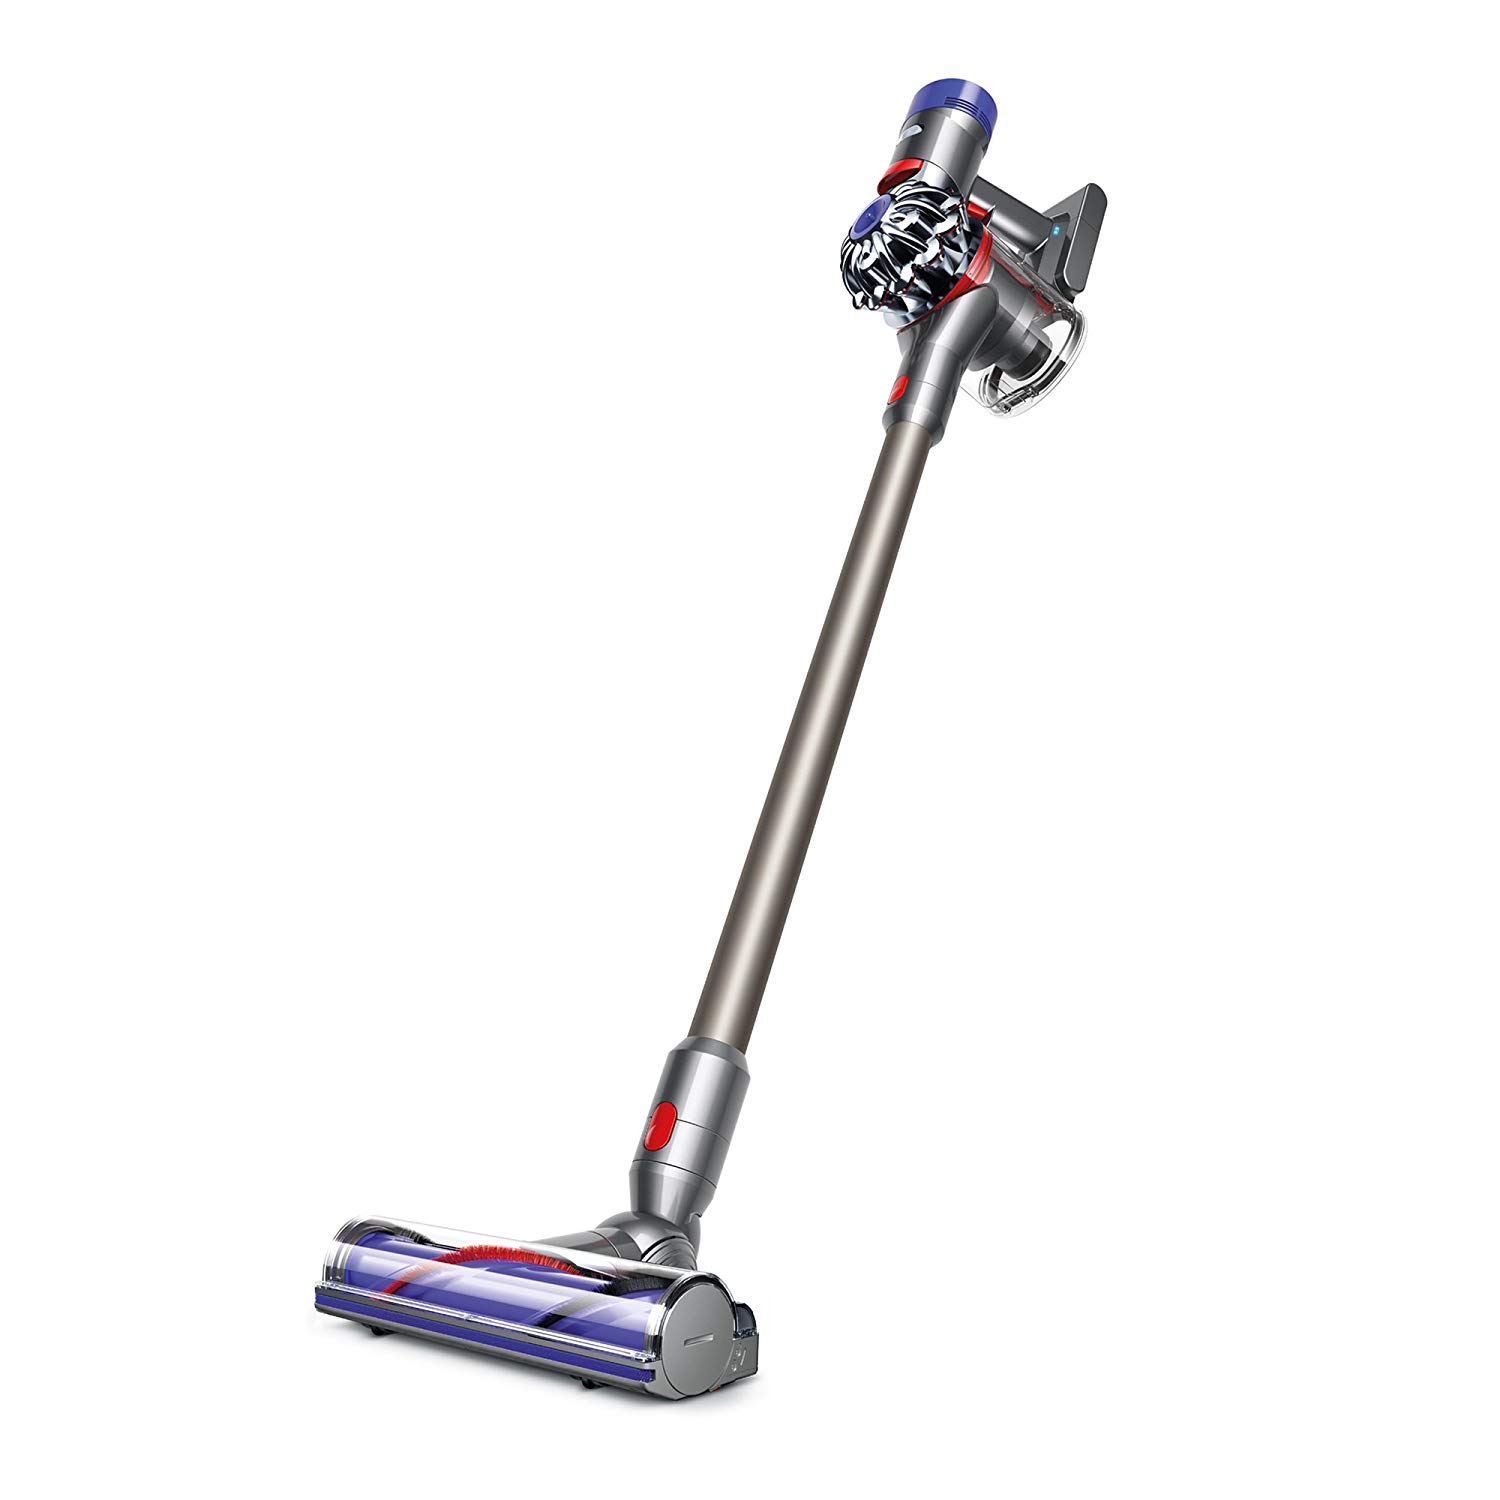 Review of Dyson V8 Animal Cordless Stick Vacuum Cleaner, Iron